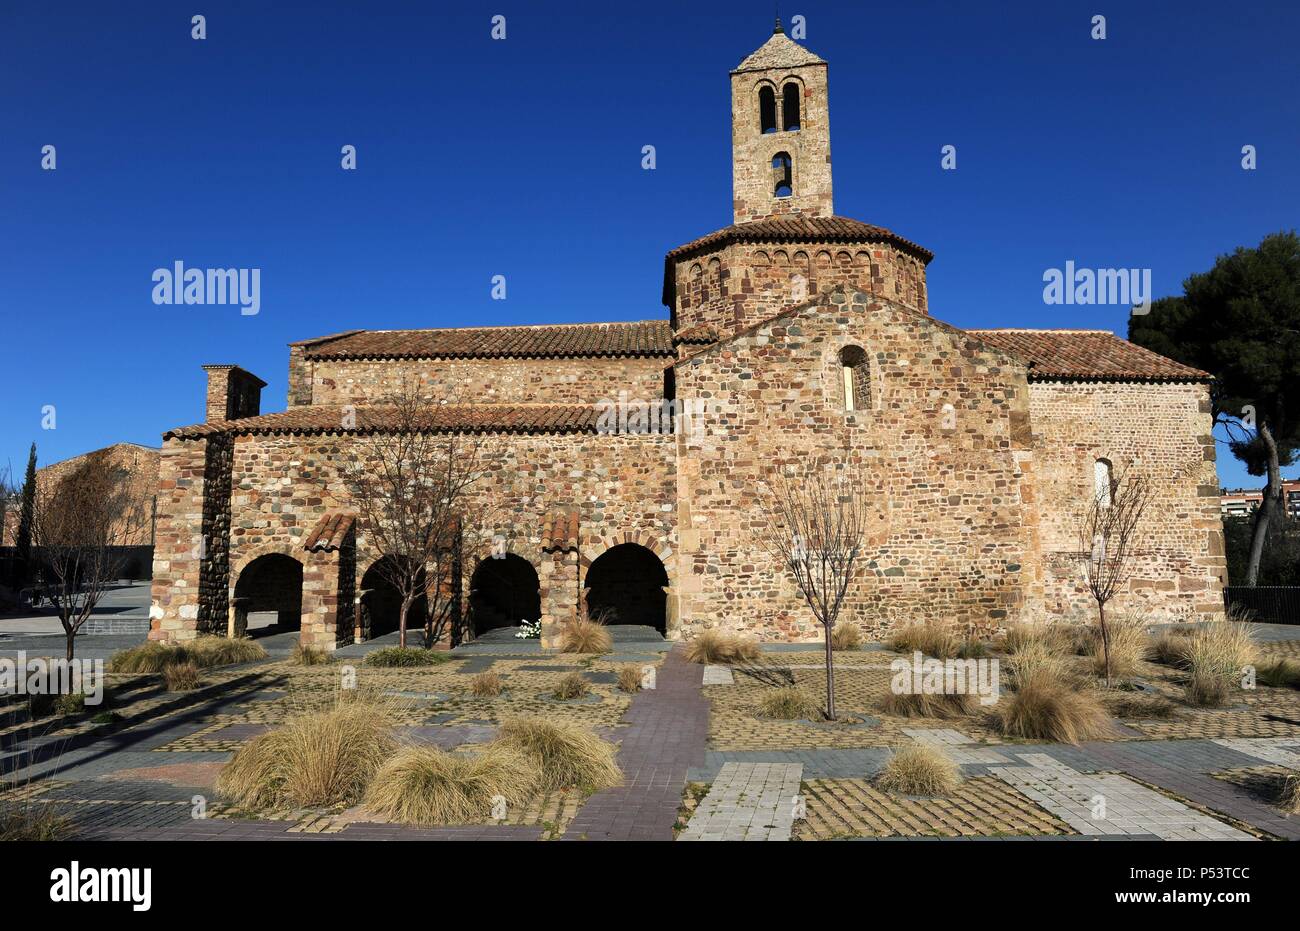 Romanesque art. Spain. 12th century. Church of St. Mary, consecrated in 1130. Exterior view of square apse, the octogonal dome crowned with two-story bell tower and south facade with remains of a portico with four arches, ancient cloister of augustines. Tarrasa. Catalonia. Stock Photo